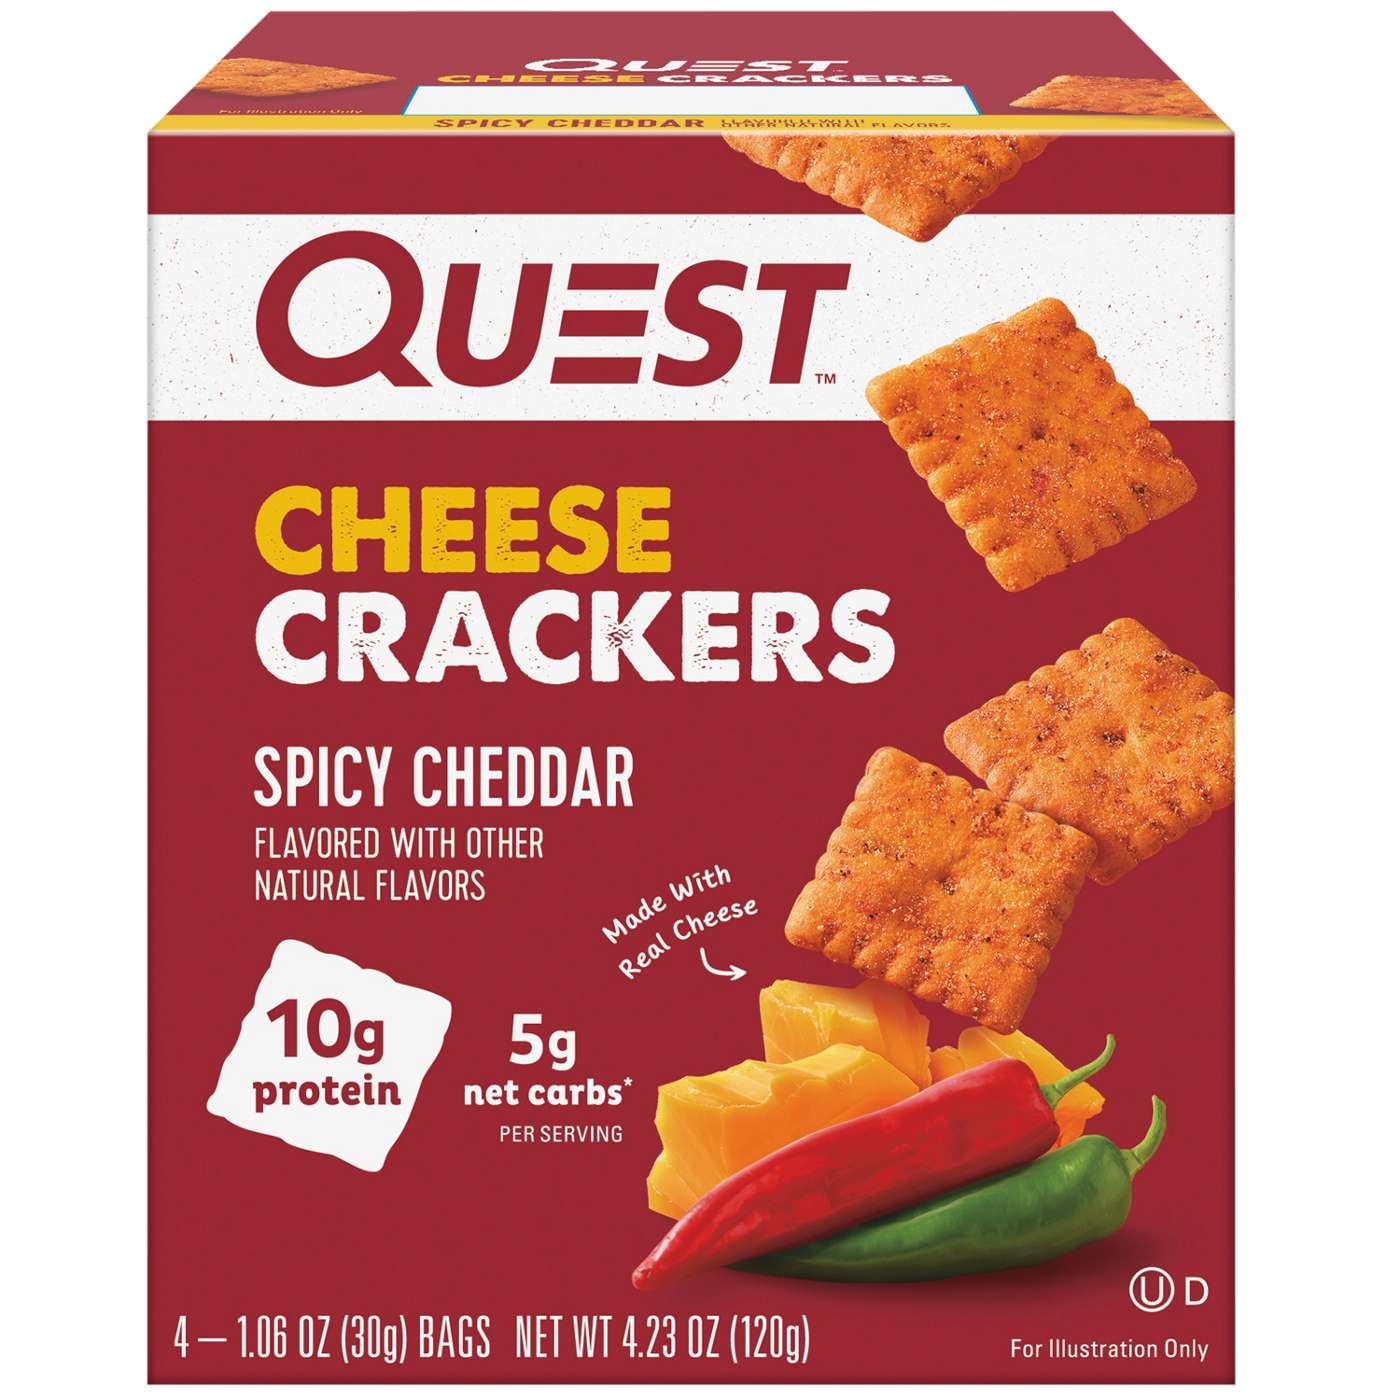 Quest Cheese Crackers - Spicy Cheddar; image 1 of 3